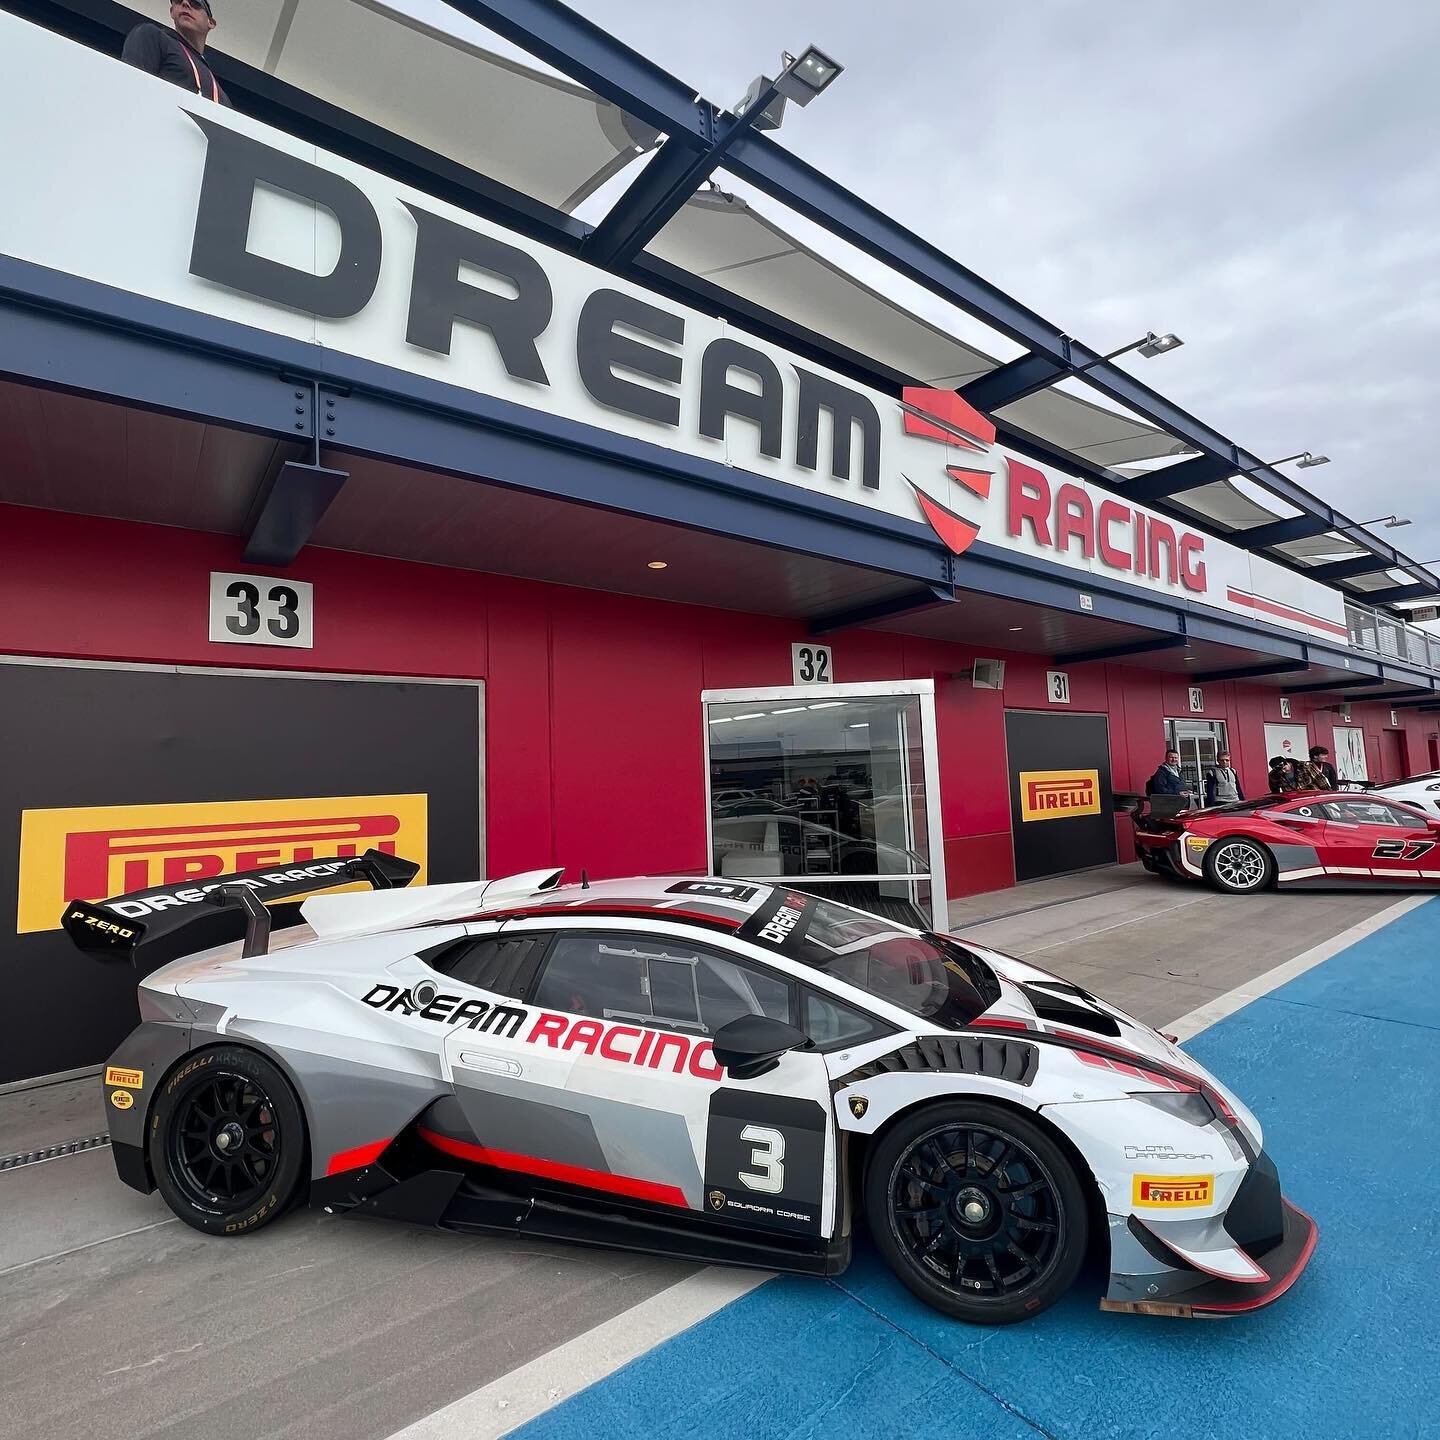 We always enjoy our time at the Las Vegas Motor Speedway, especially because we get to see all of the awesome whips at Dream Racing!
Dream Racing at Las Vegas Motor Speedway features the world's largest and fastest selection of exotic supercars and i